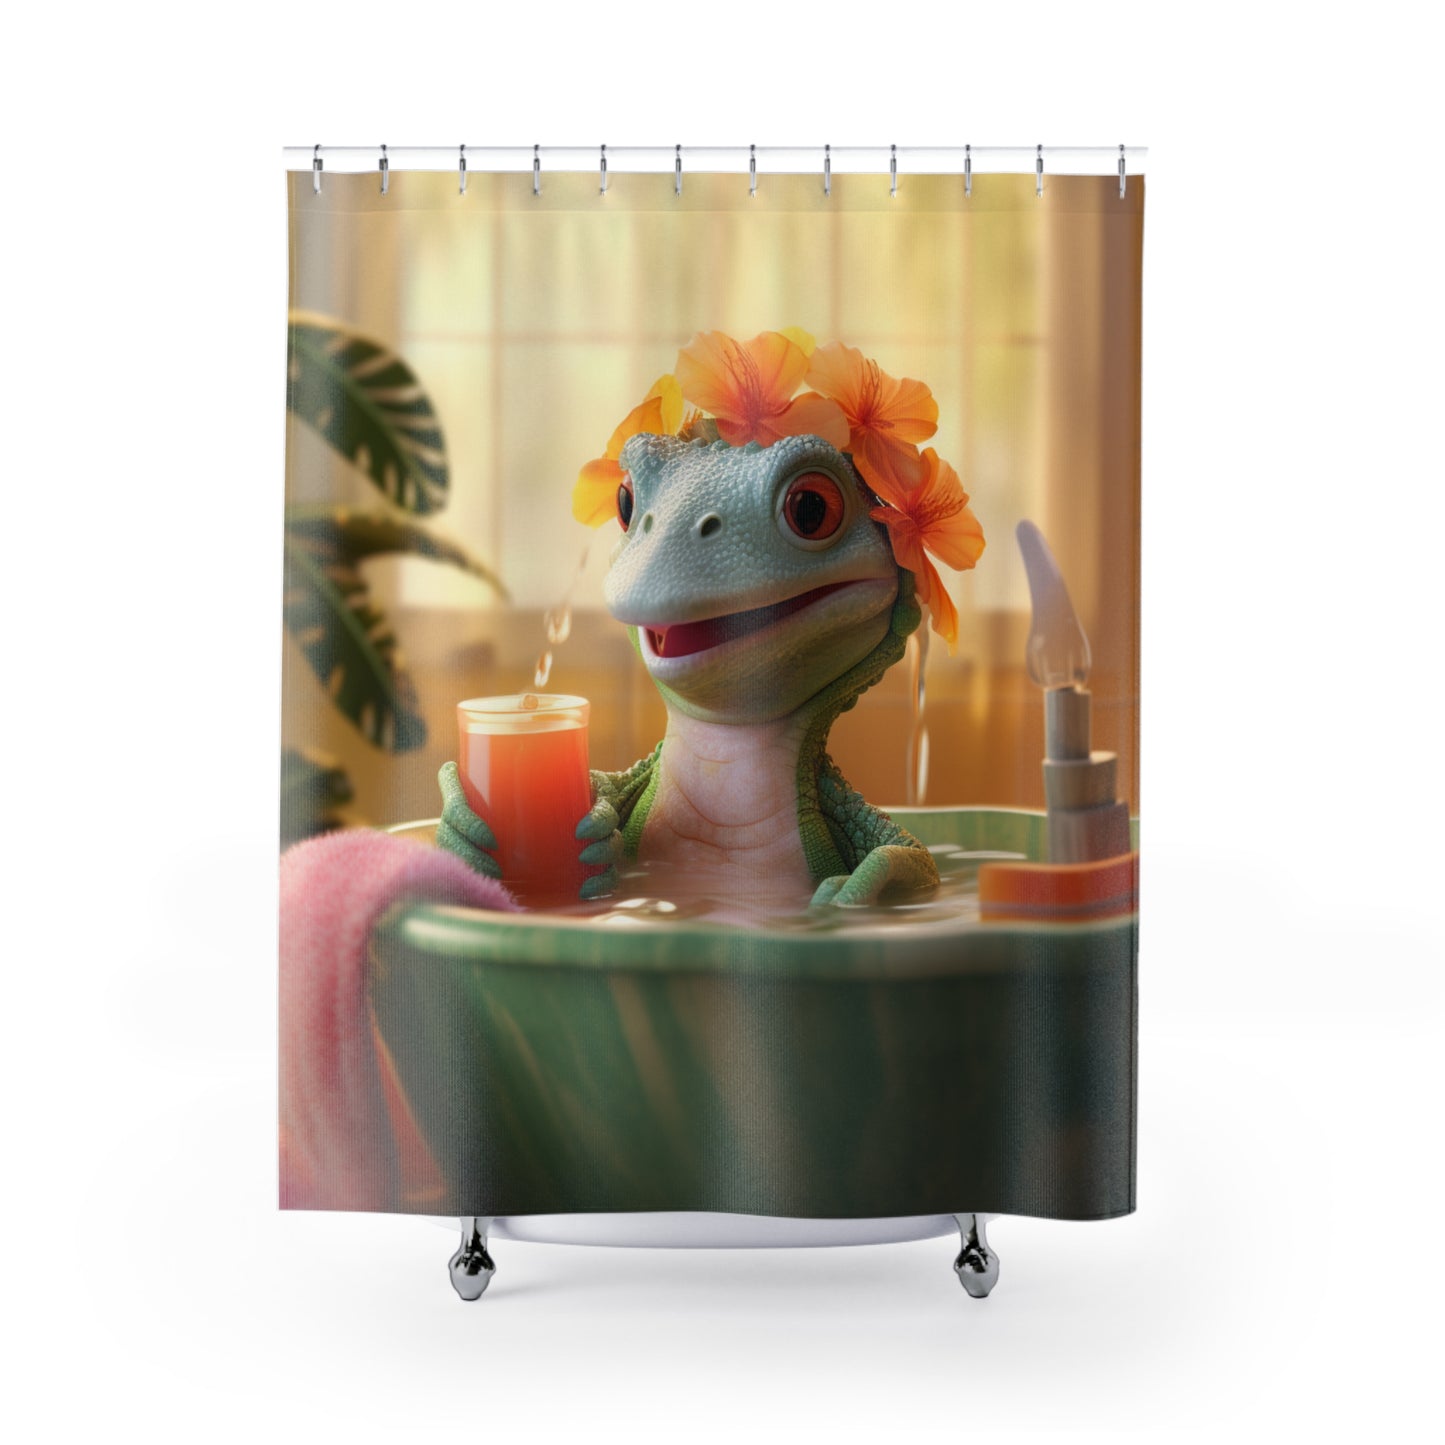 Whimsical and Playful Shower Curtain - Lizard in the Tub